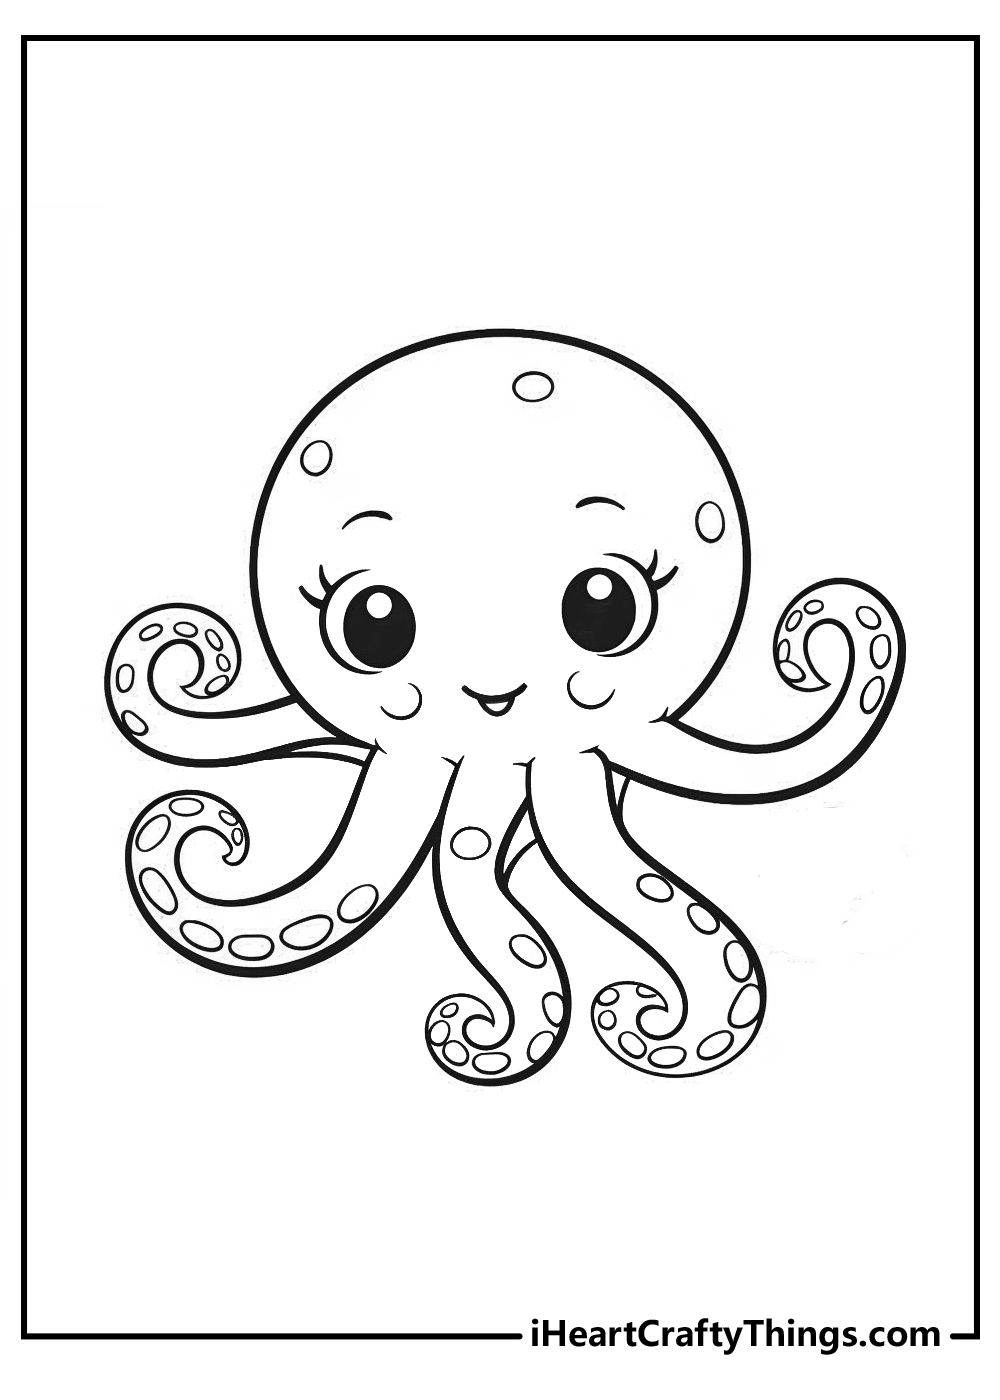 black-and-white octopus coloring pages